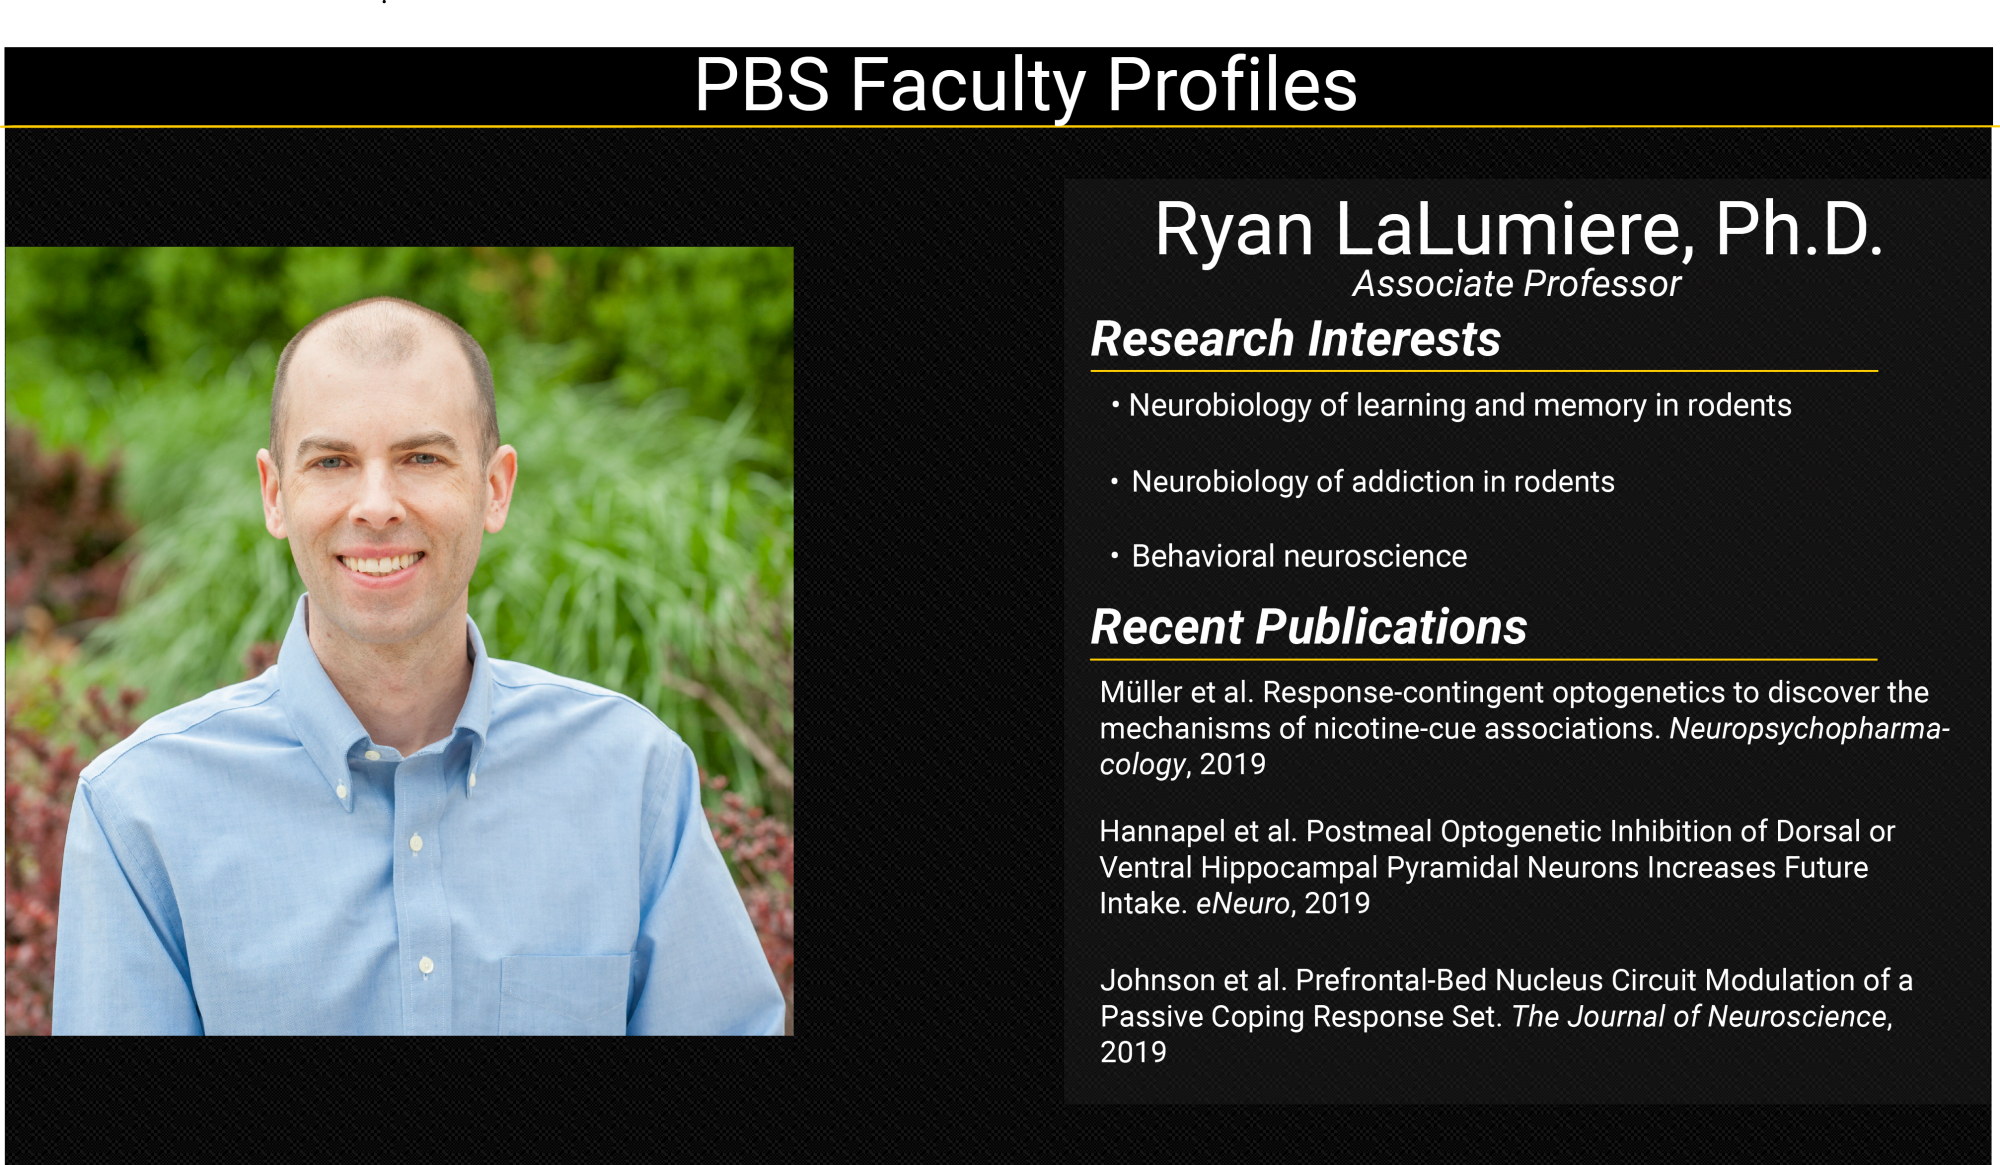 Ryan LaLumiere Faculty Profile